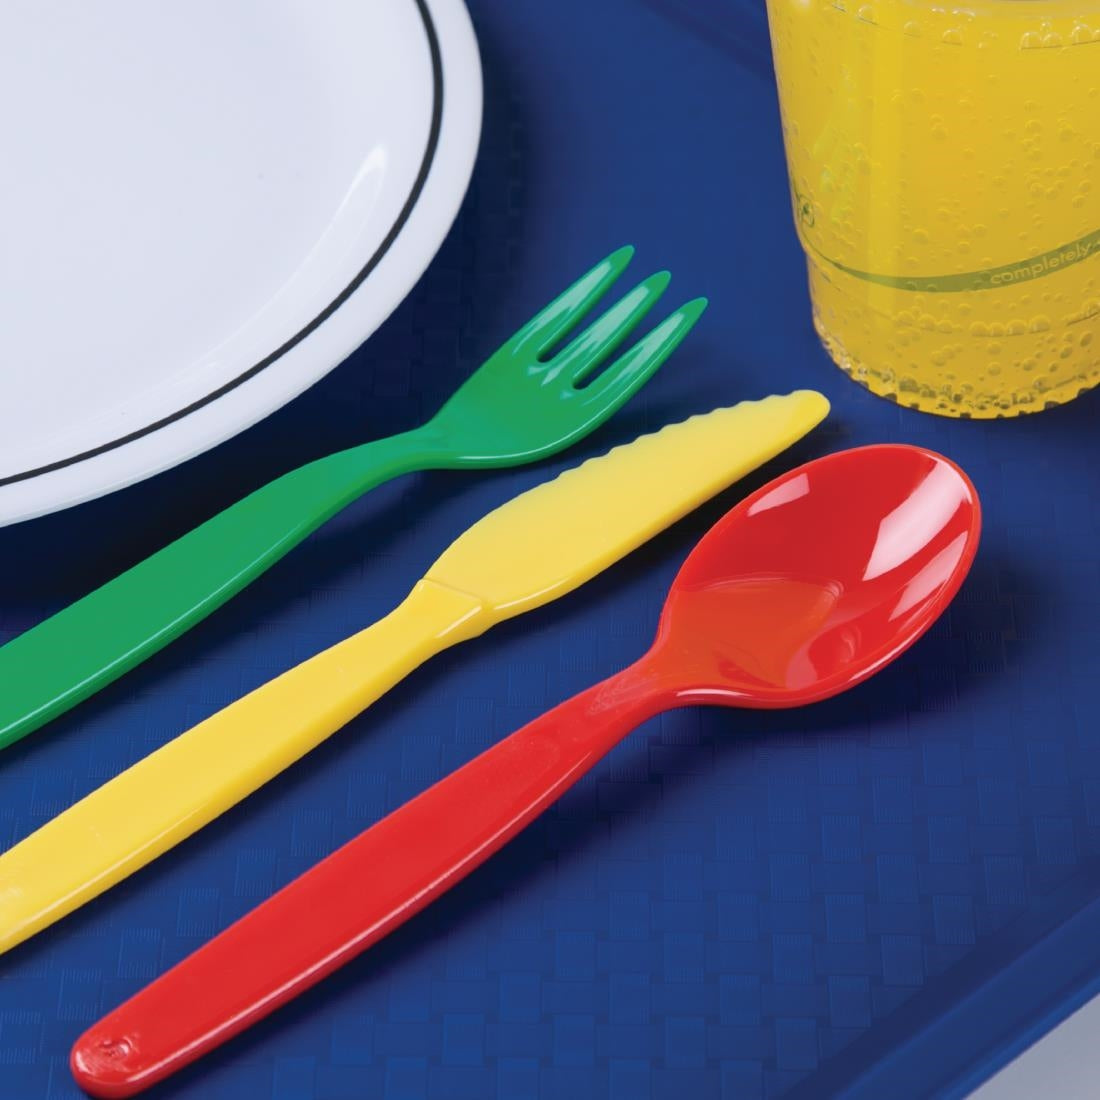 DL123 Kristallon Polycarbonate Spoon Yellow (Pack of 12) JD Catering Equipment Solutions Ltd